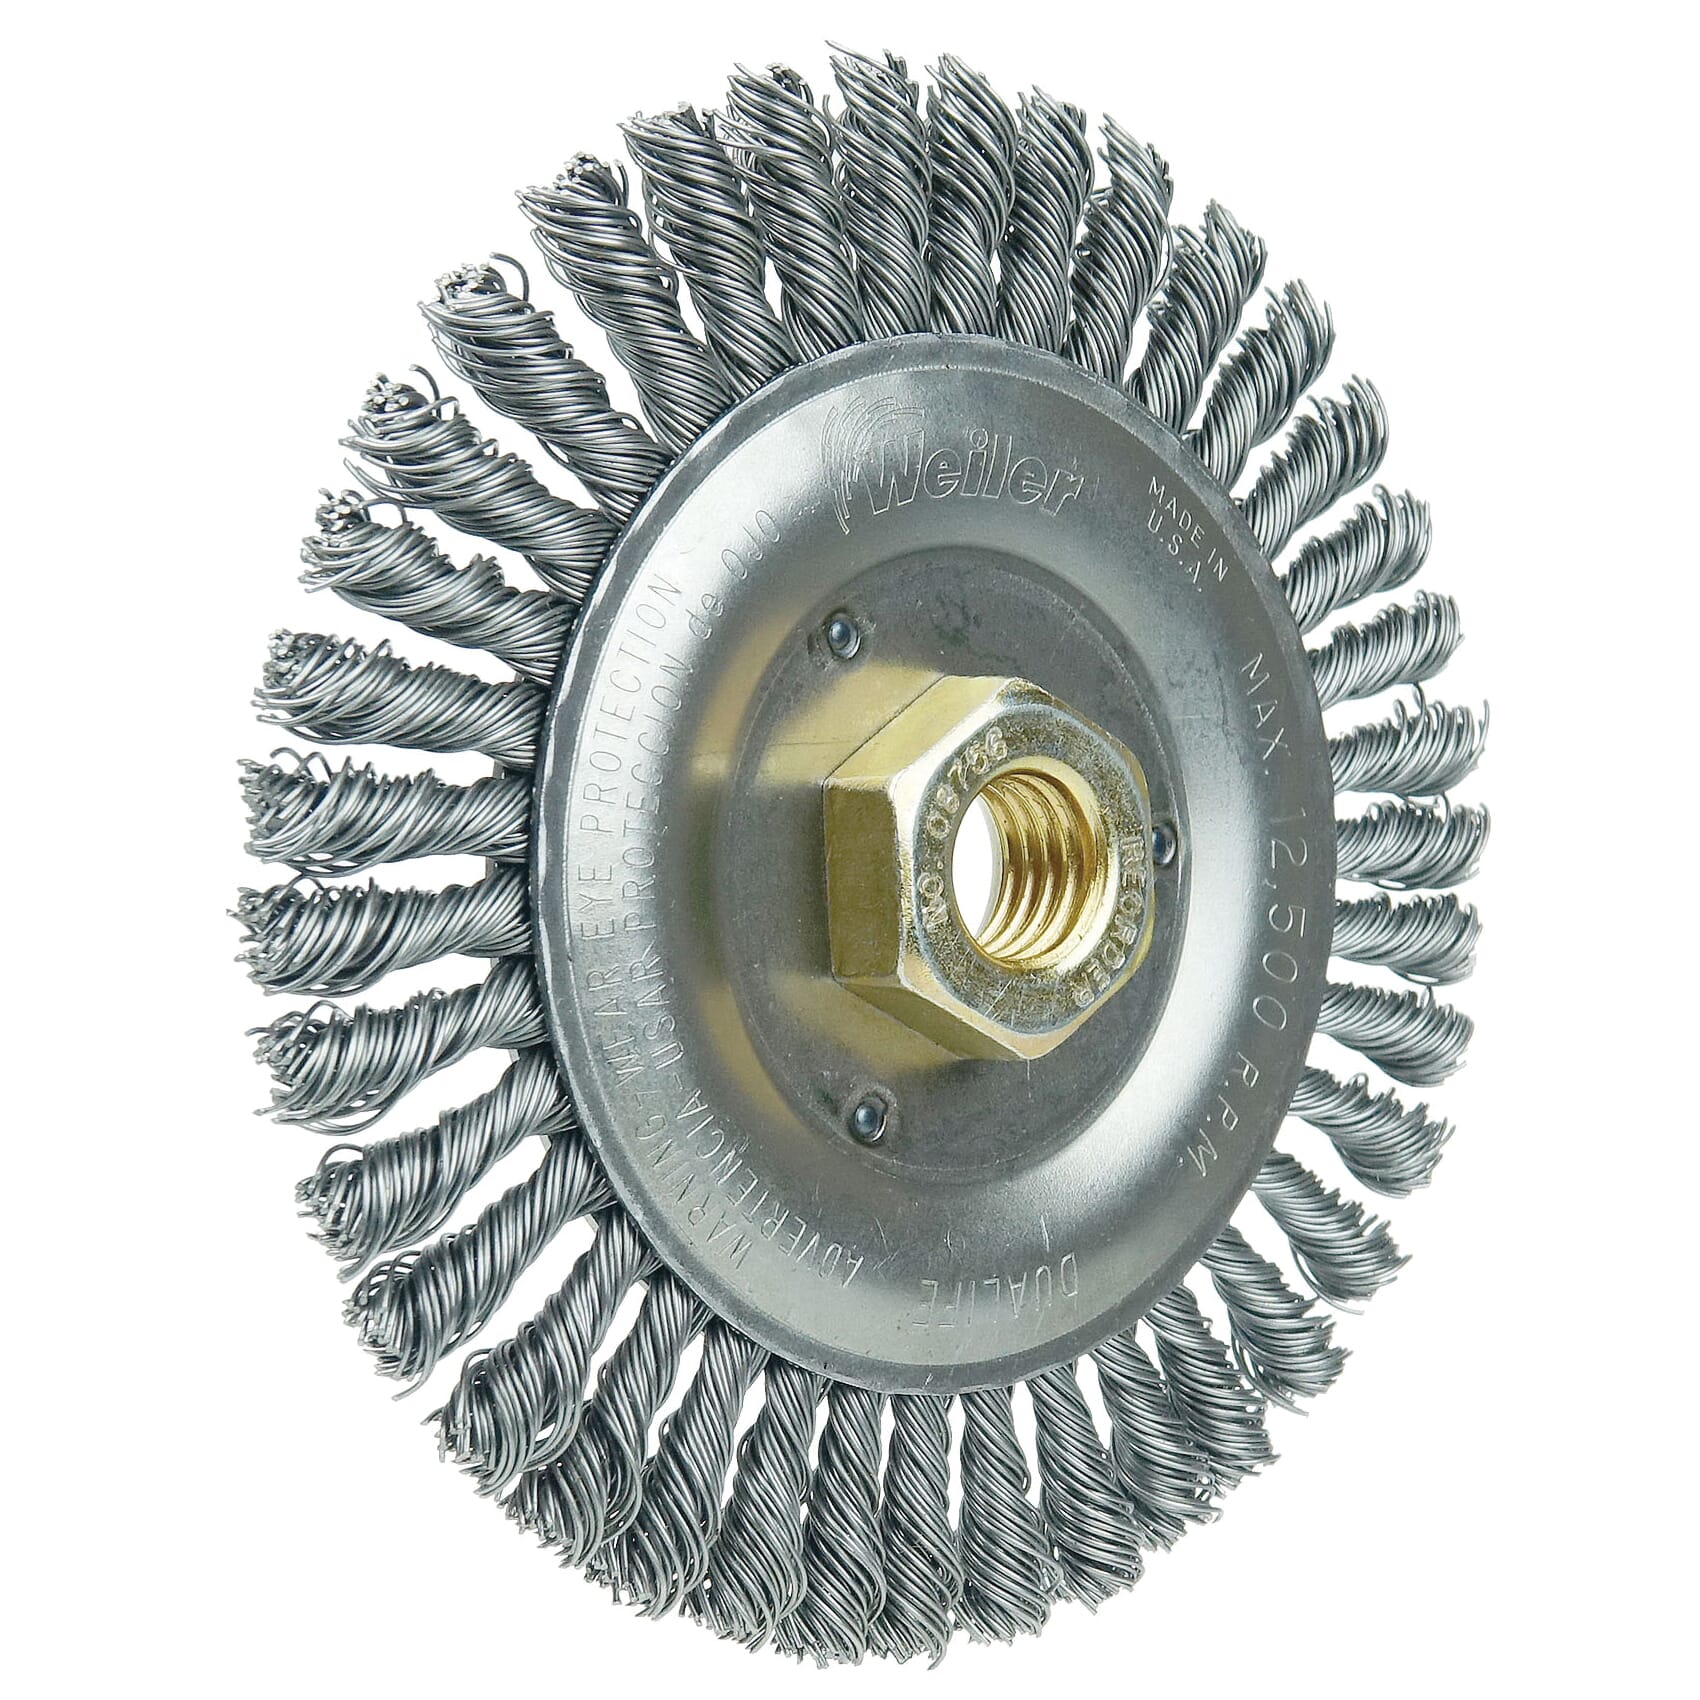 Roughneck® 08756 Narrow Face Root Pass Wheel Brush With Nut, 5 in Dia Brush, 3/16 in W Face, 0.02 in Dia Stringer Bead Knot Filament/Wire, 5/8-11 Arbor Hole